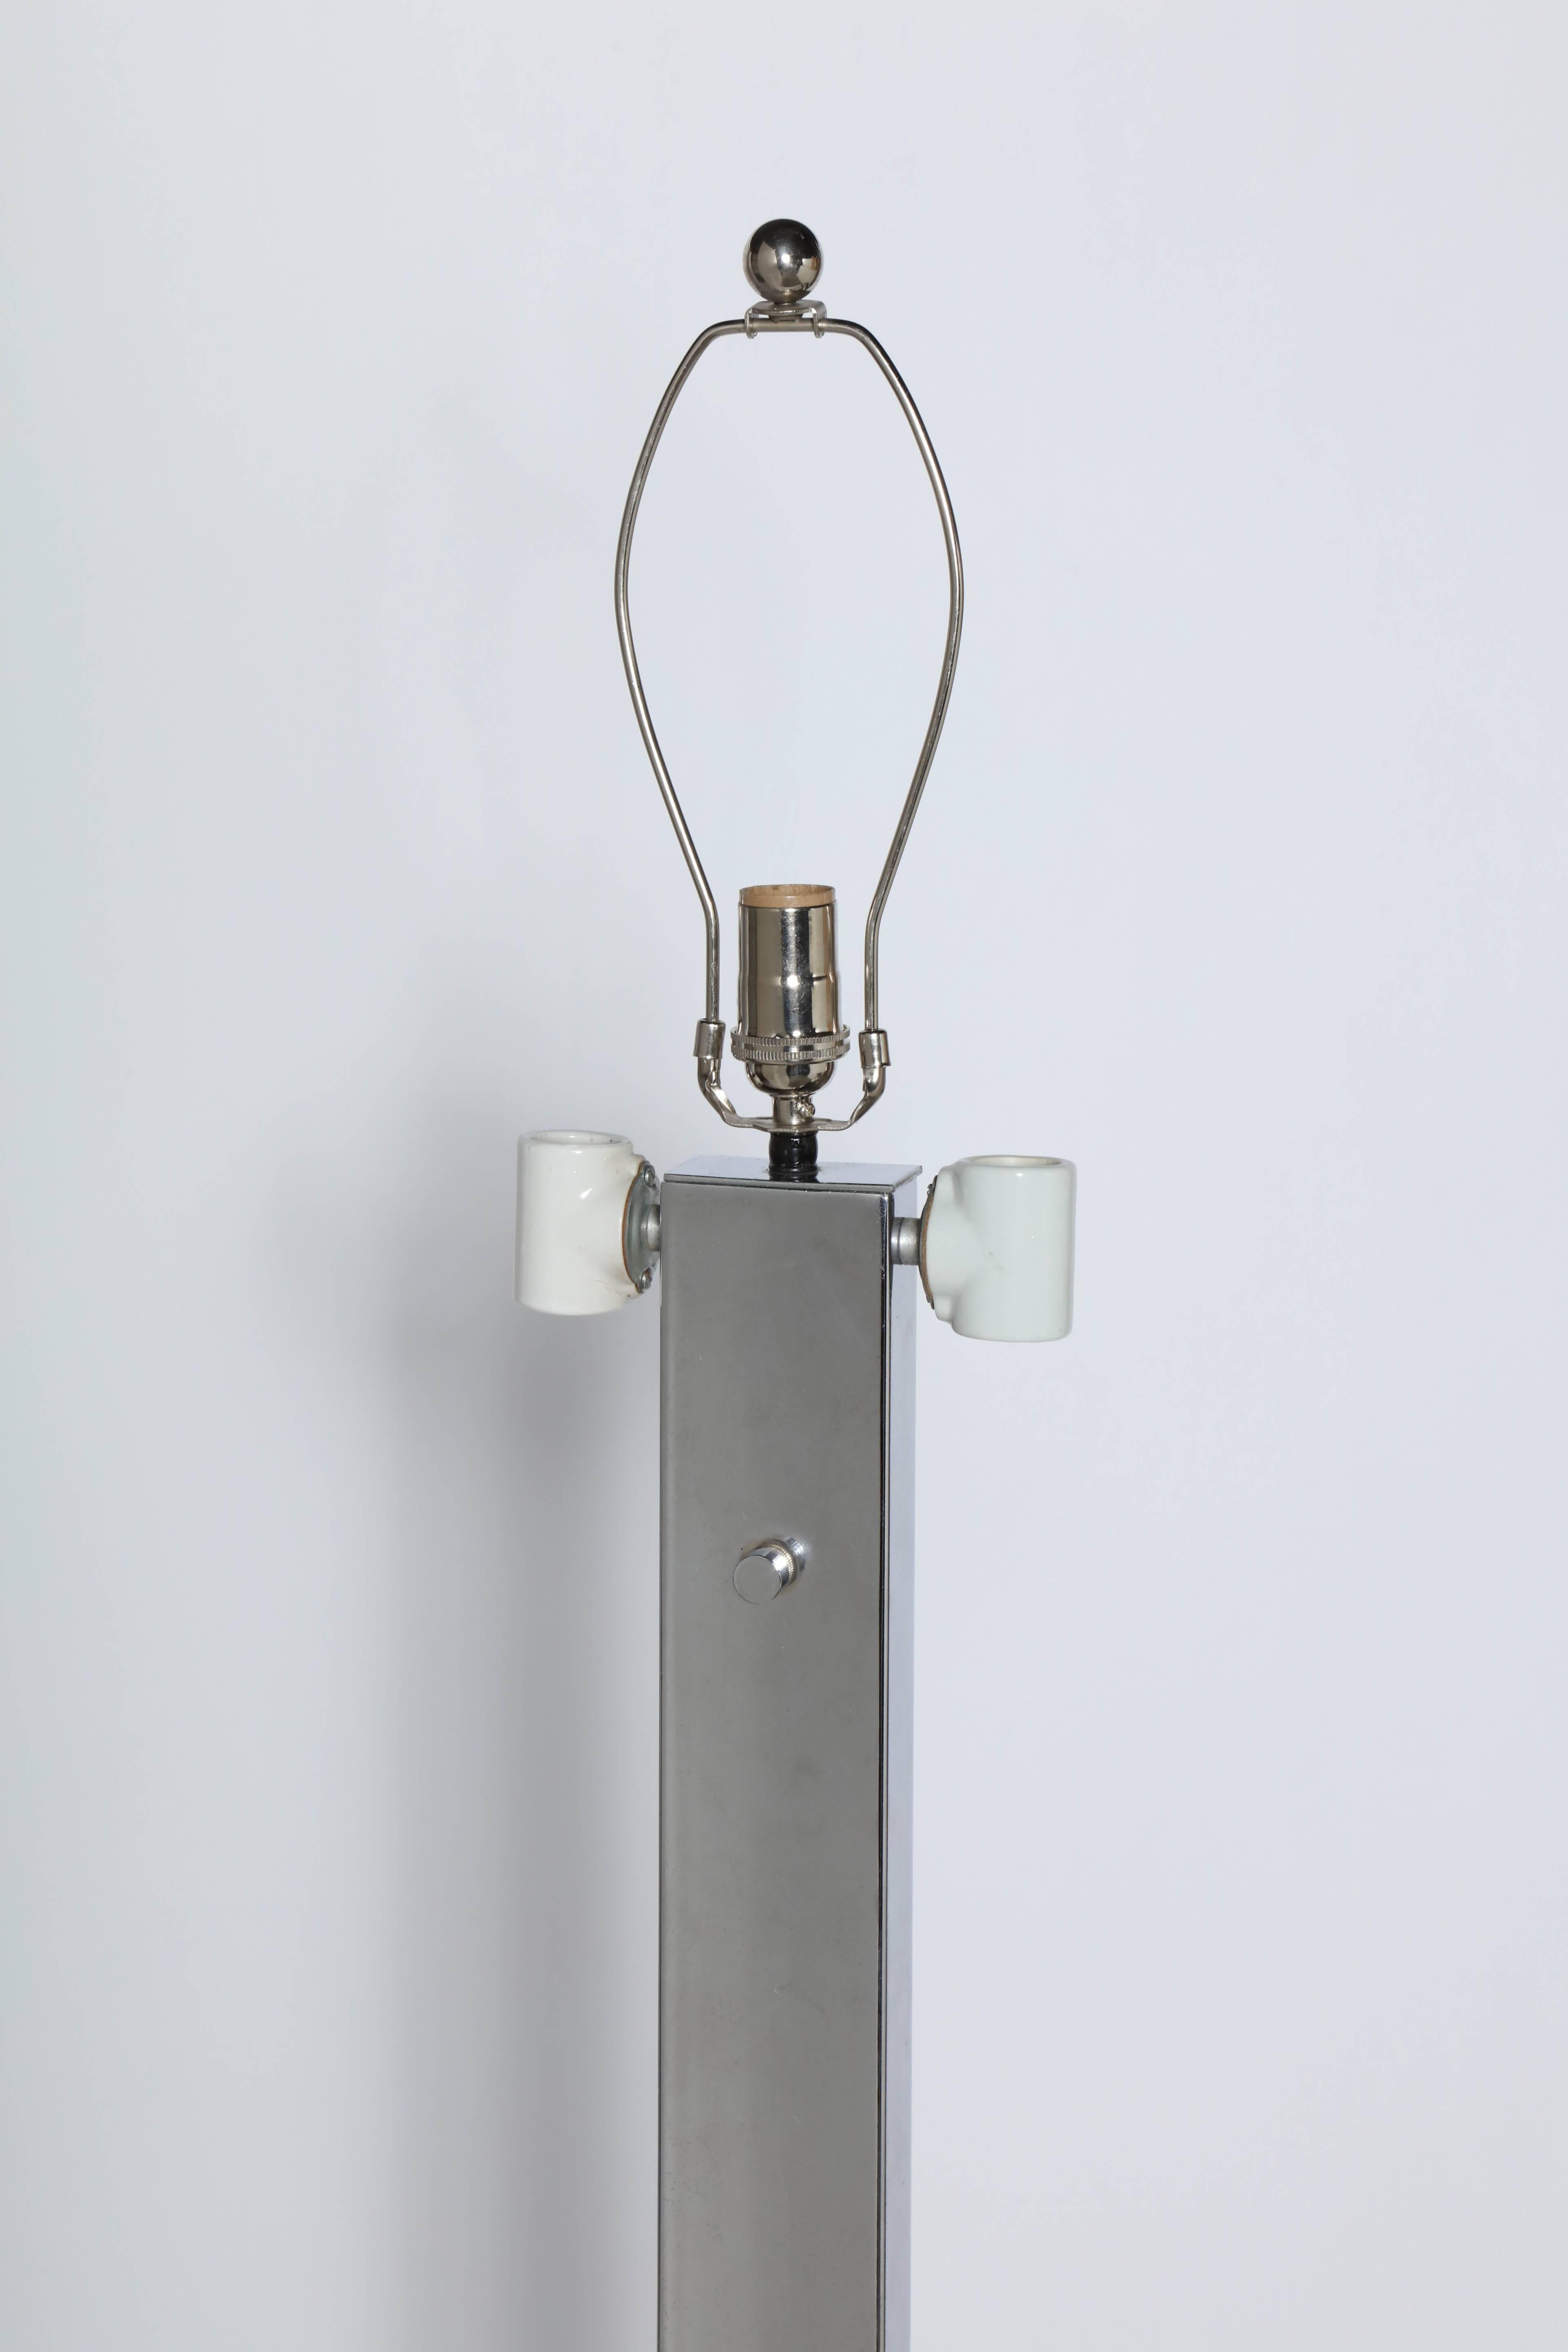 Tall and Modern George Kovacs Five Socket Chrome Reading Floor Lamp. Small footprint. Featuring a  Chromed Steel rectangular column with new Nickel plated top socket and 4 original Off-White ceramic side sockets (2 up and 2 down) on heavy balanced,